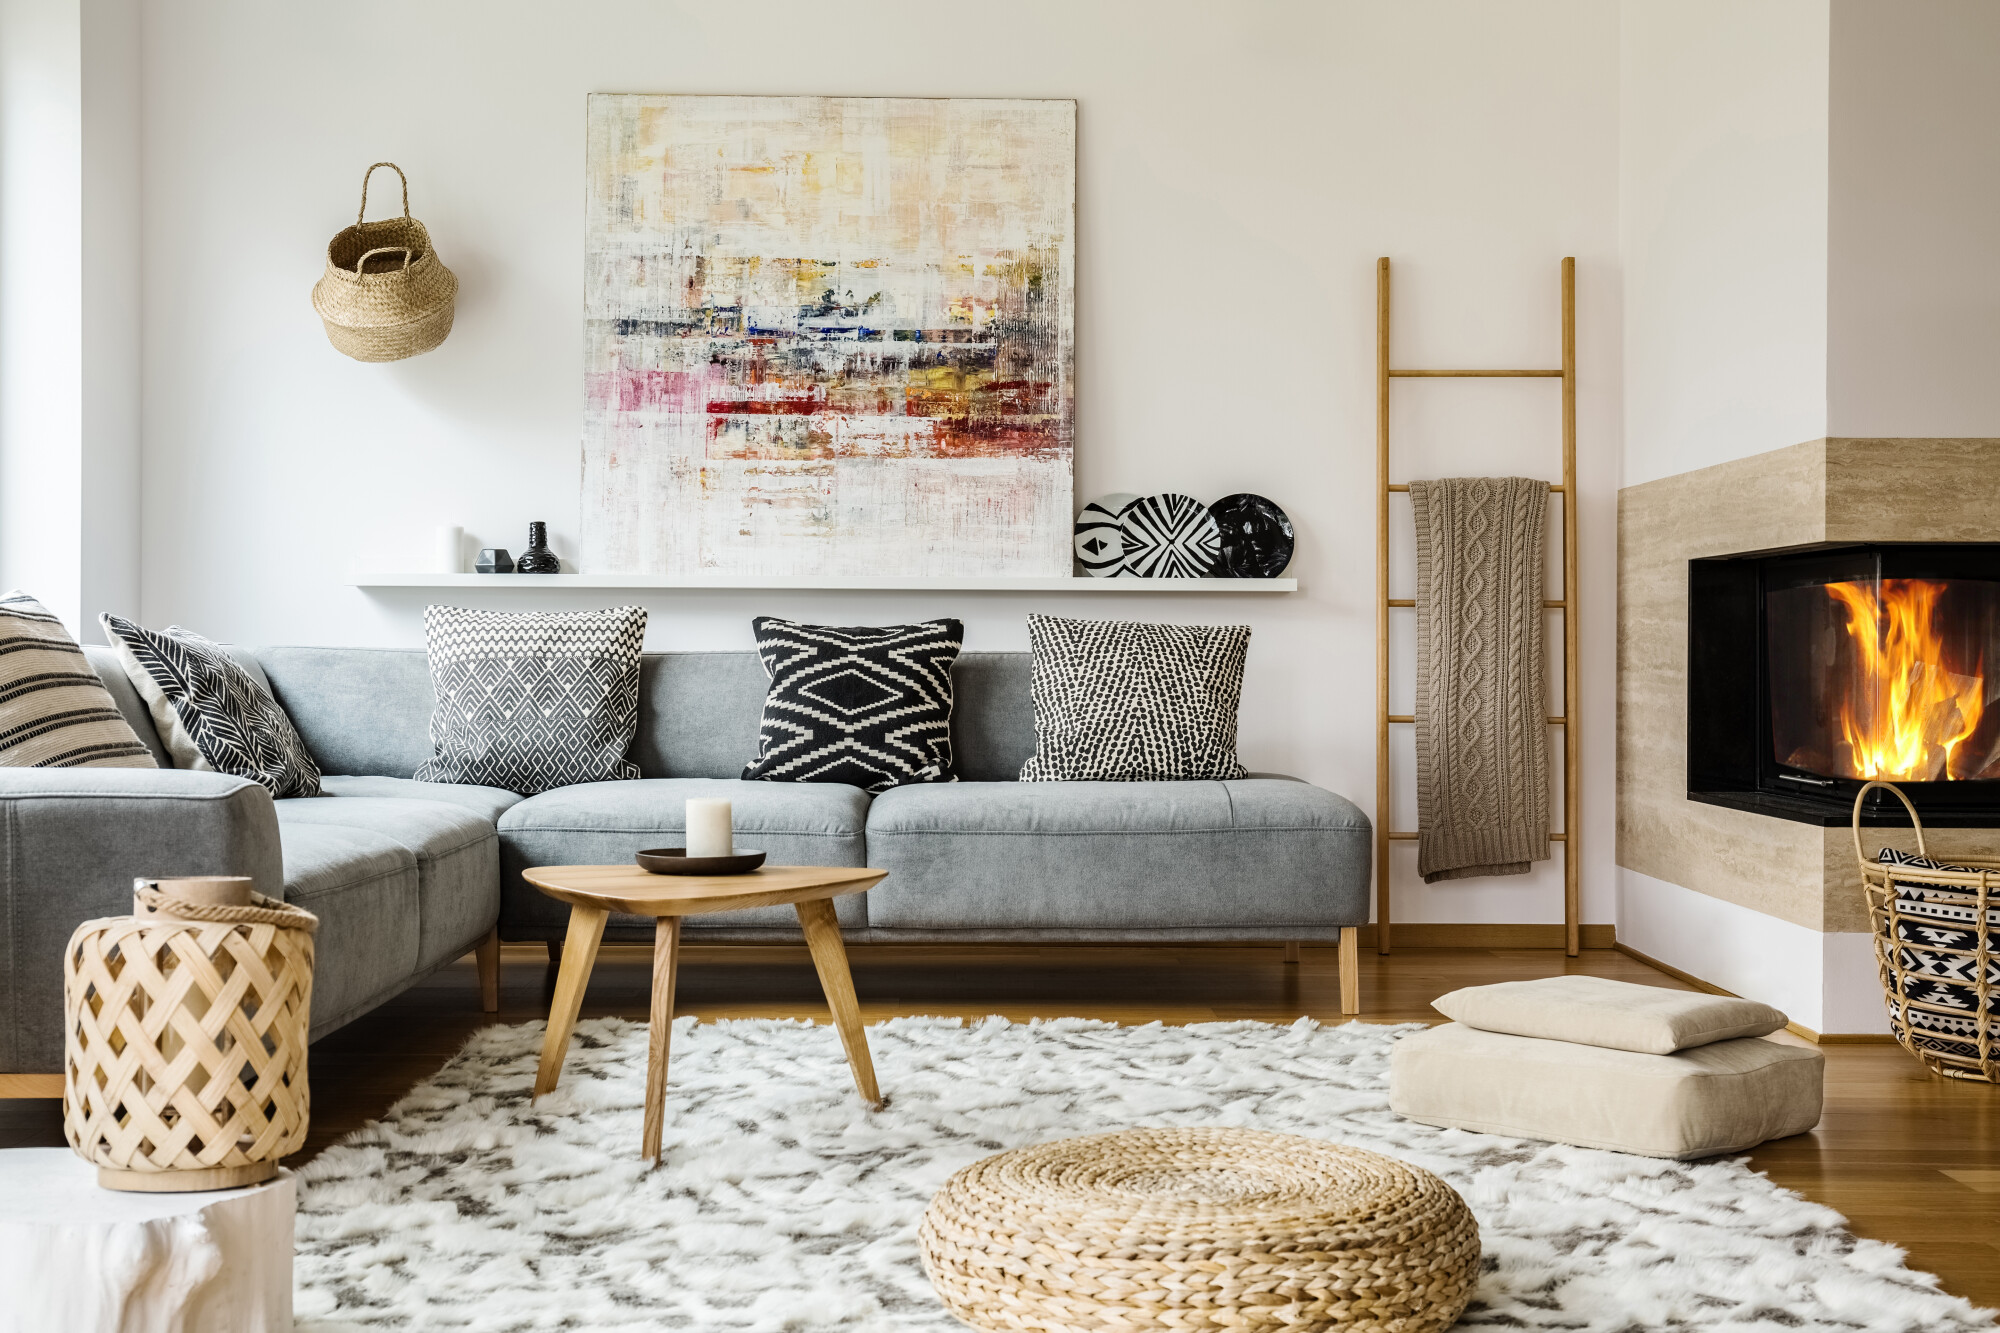 Giving your living room a proper design requires knowing what can hinder your progress. Here are living room layout mistakes and how to avoid them.